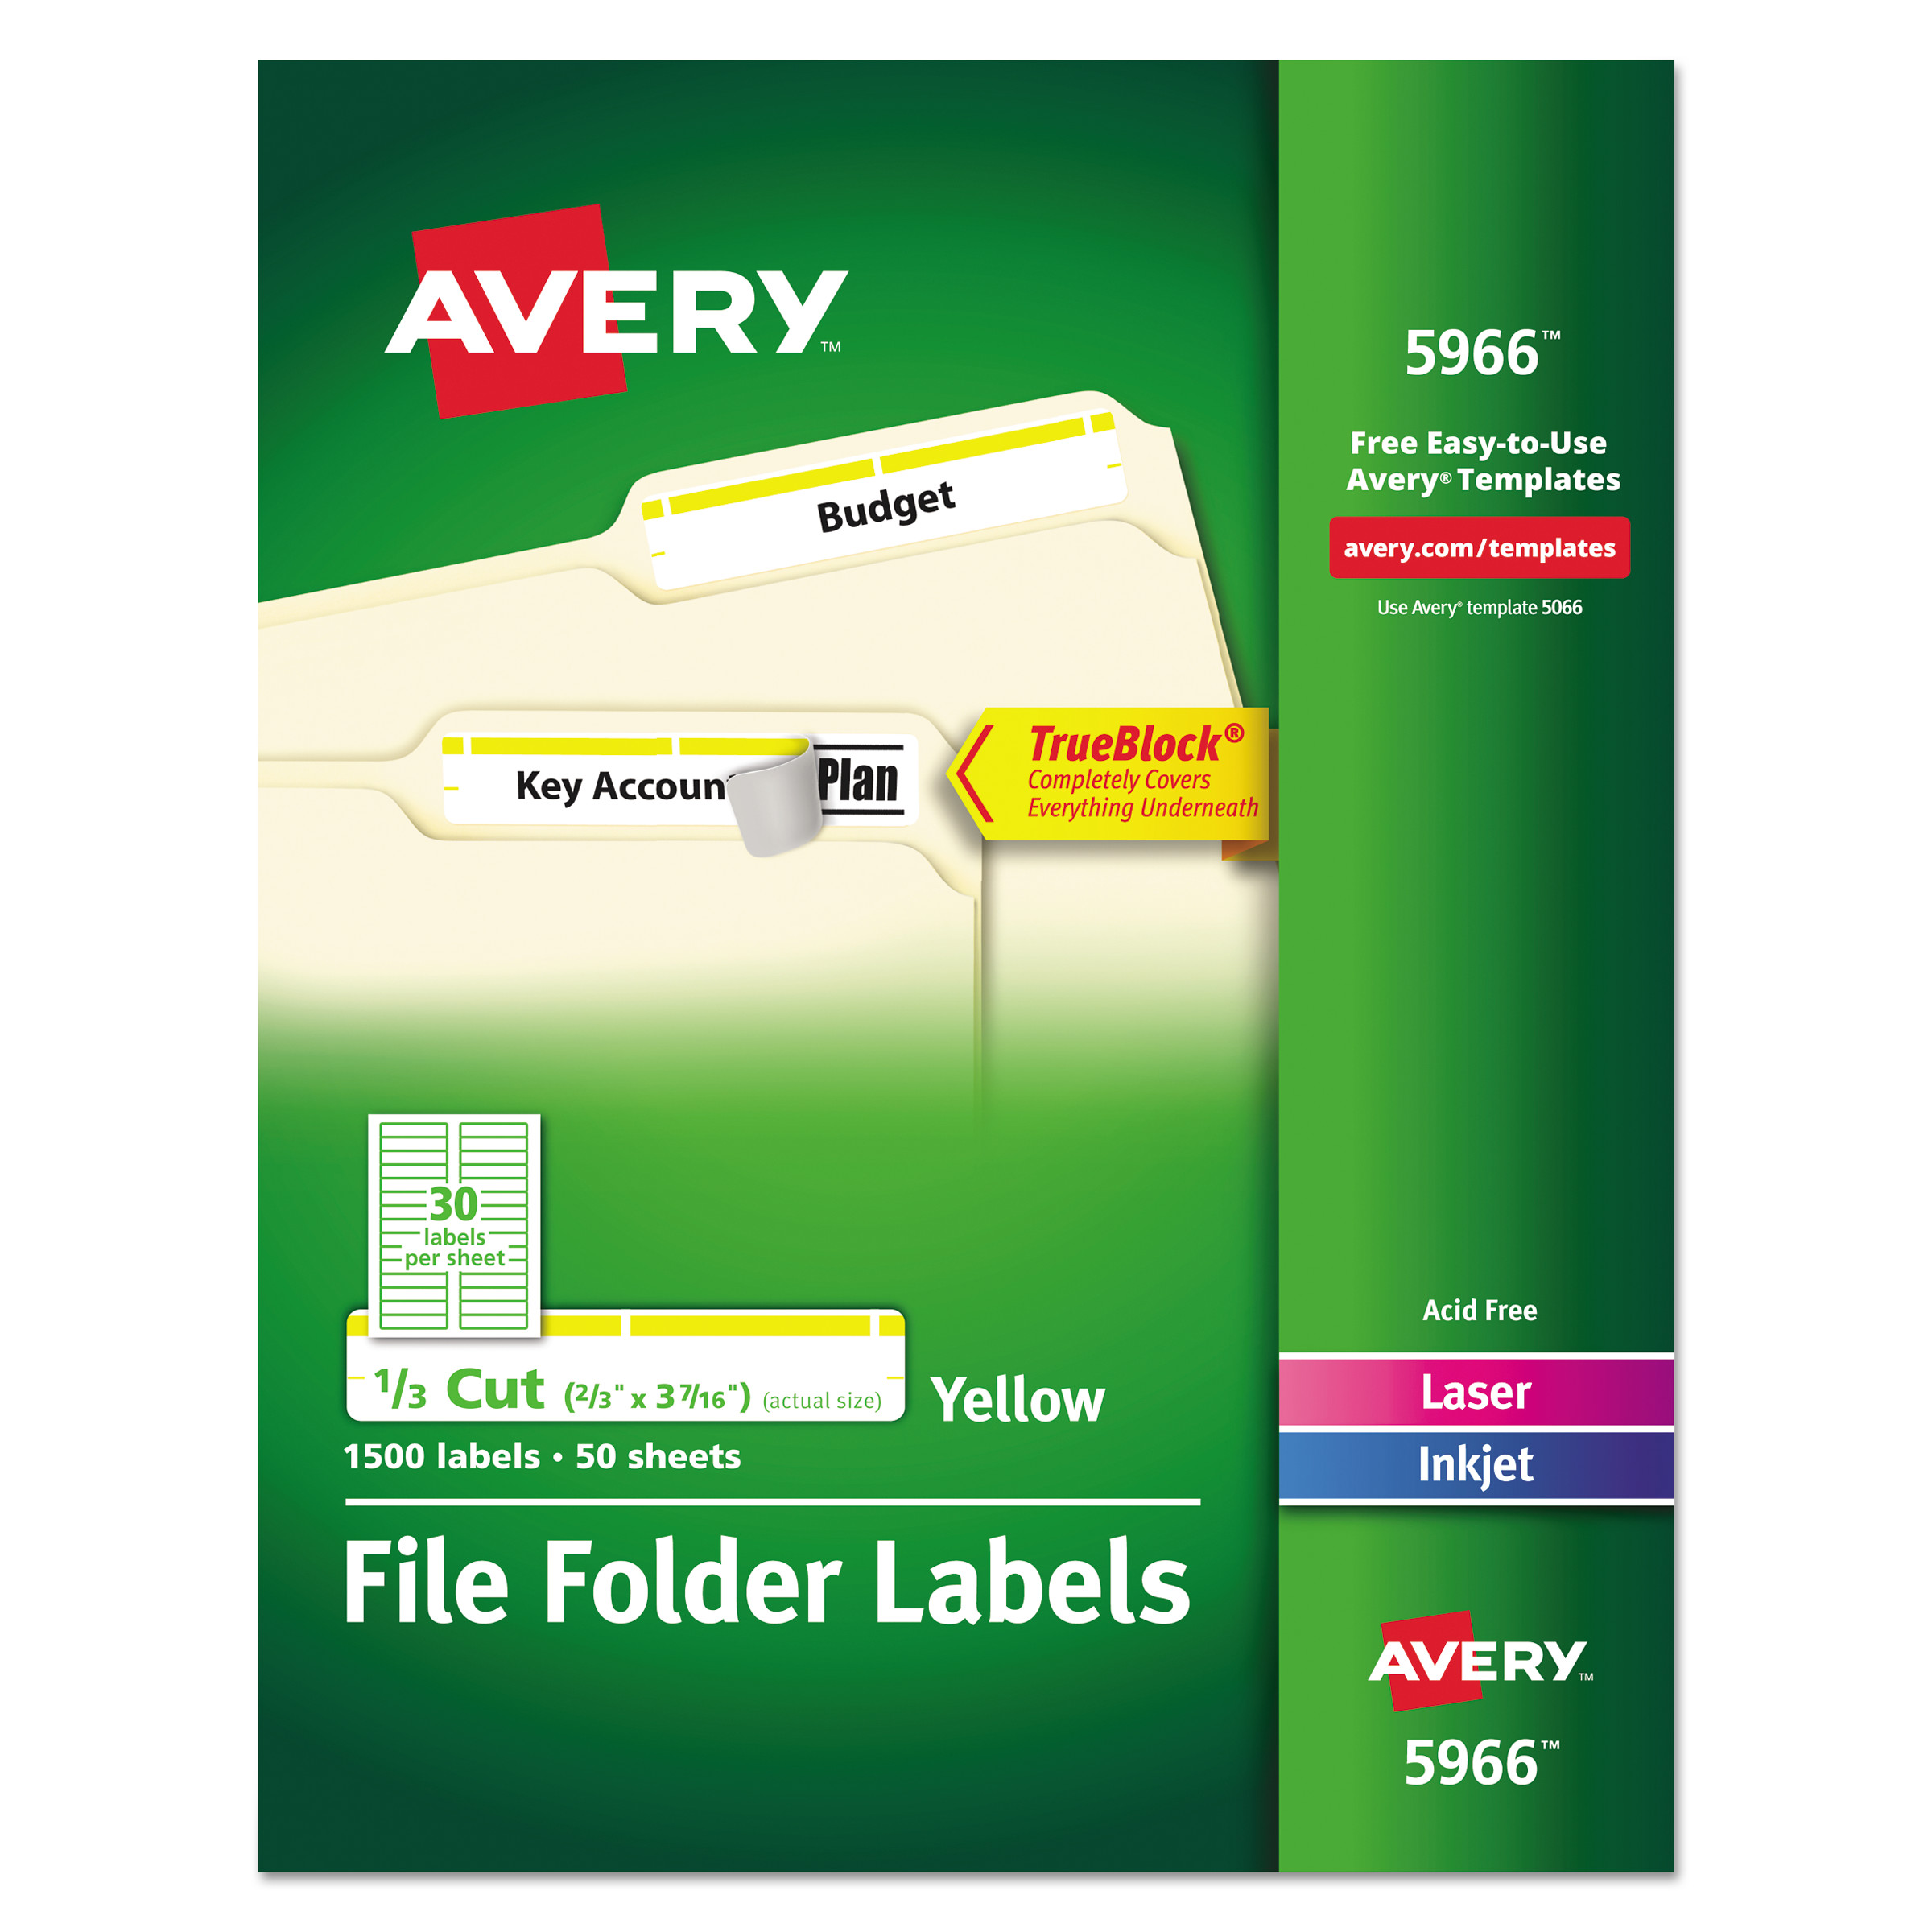  Avery 05966 Permanent TrueBlock File Folder Labels with Sure Feed Technology, 0.66 x 3.44, White, 30/Sheet, 50 Sheets/Box (AVE5966) 